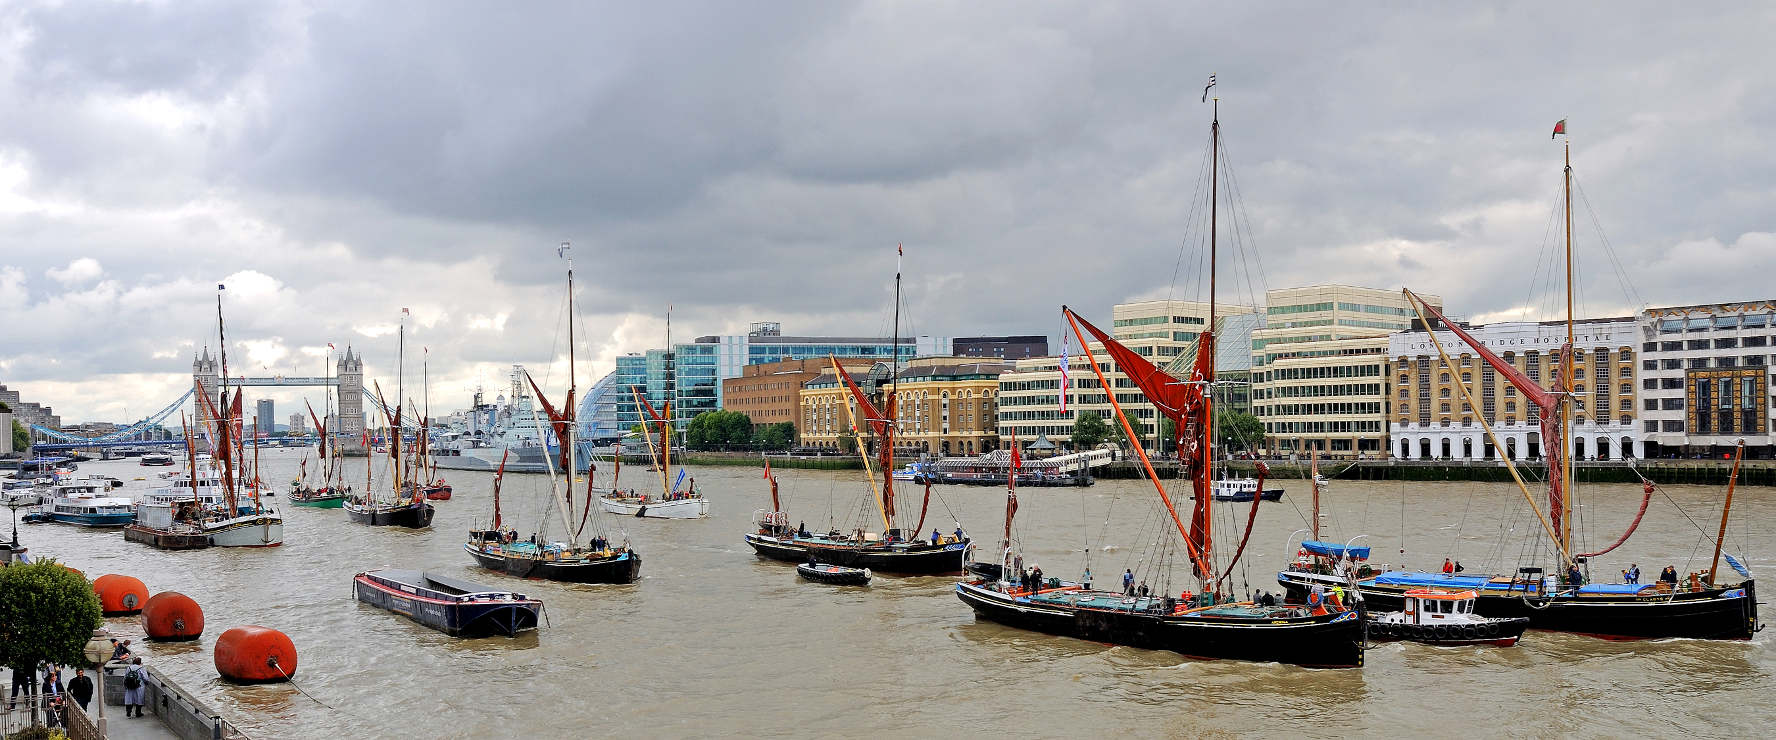 Barges stemming the tide in the Upper Pool waiting for Tower Bridge to reopen for their exit to West India Docks where they became a live Popup Museum. — Picture by Nigel Pepper (nigelpepperphotography.co.uk)